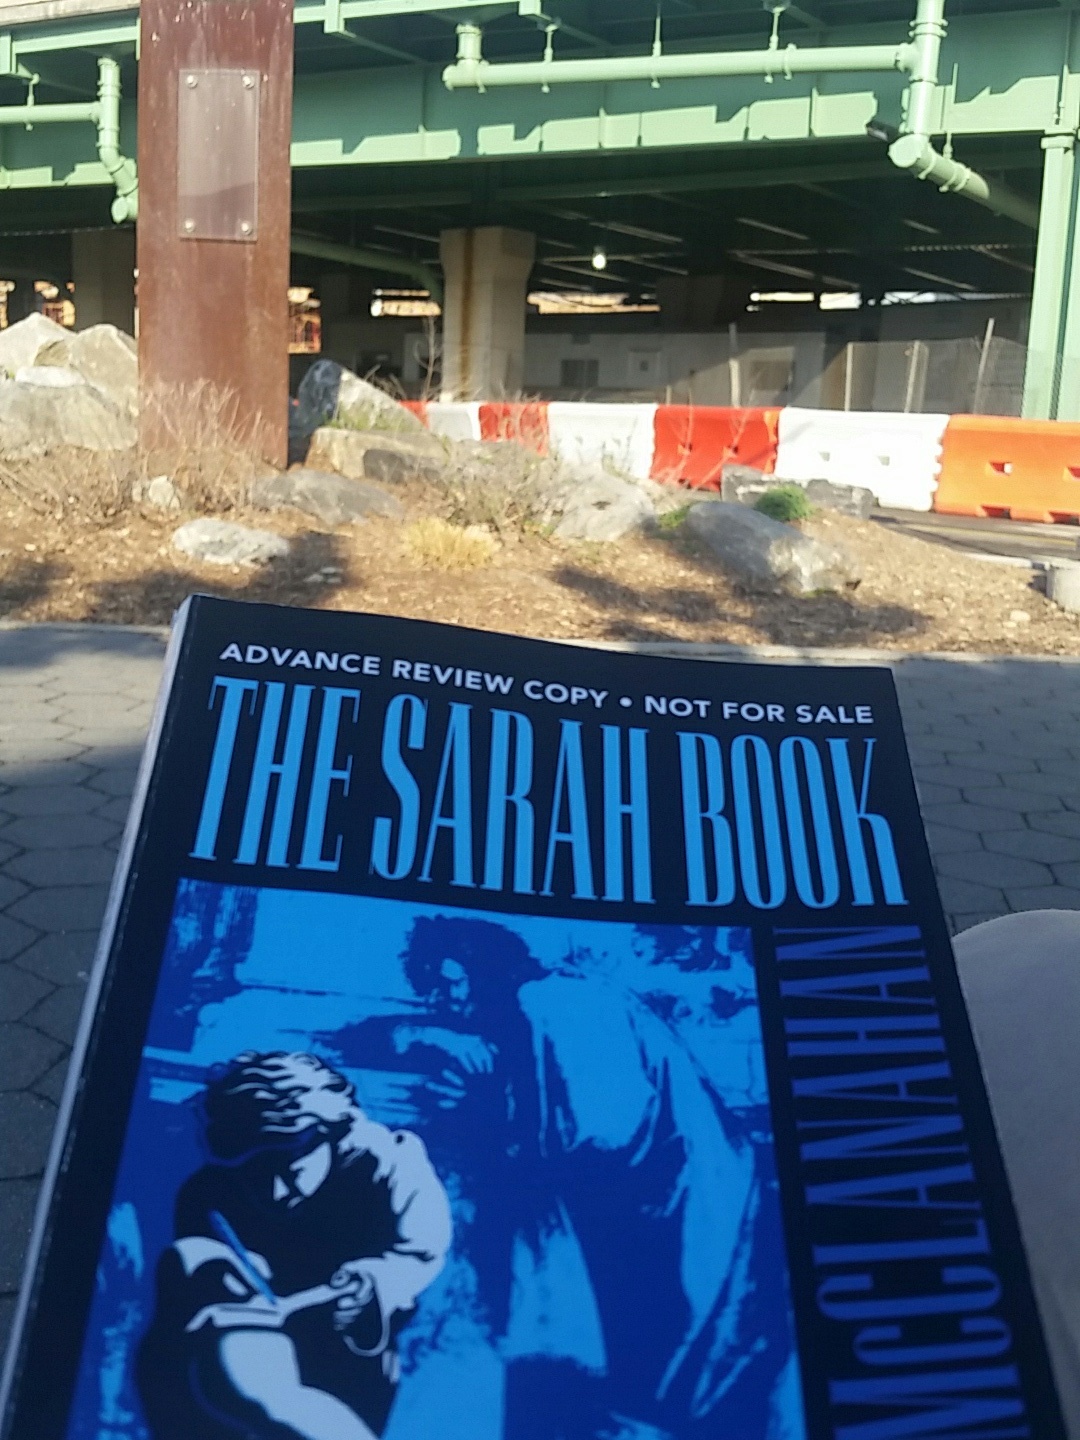 The Sarah Book by Scott McClanahan